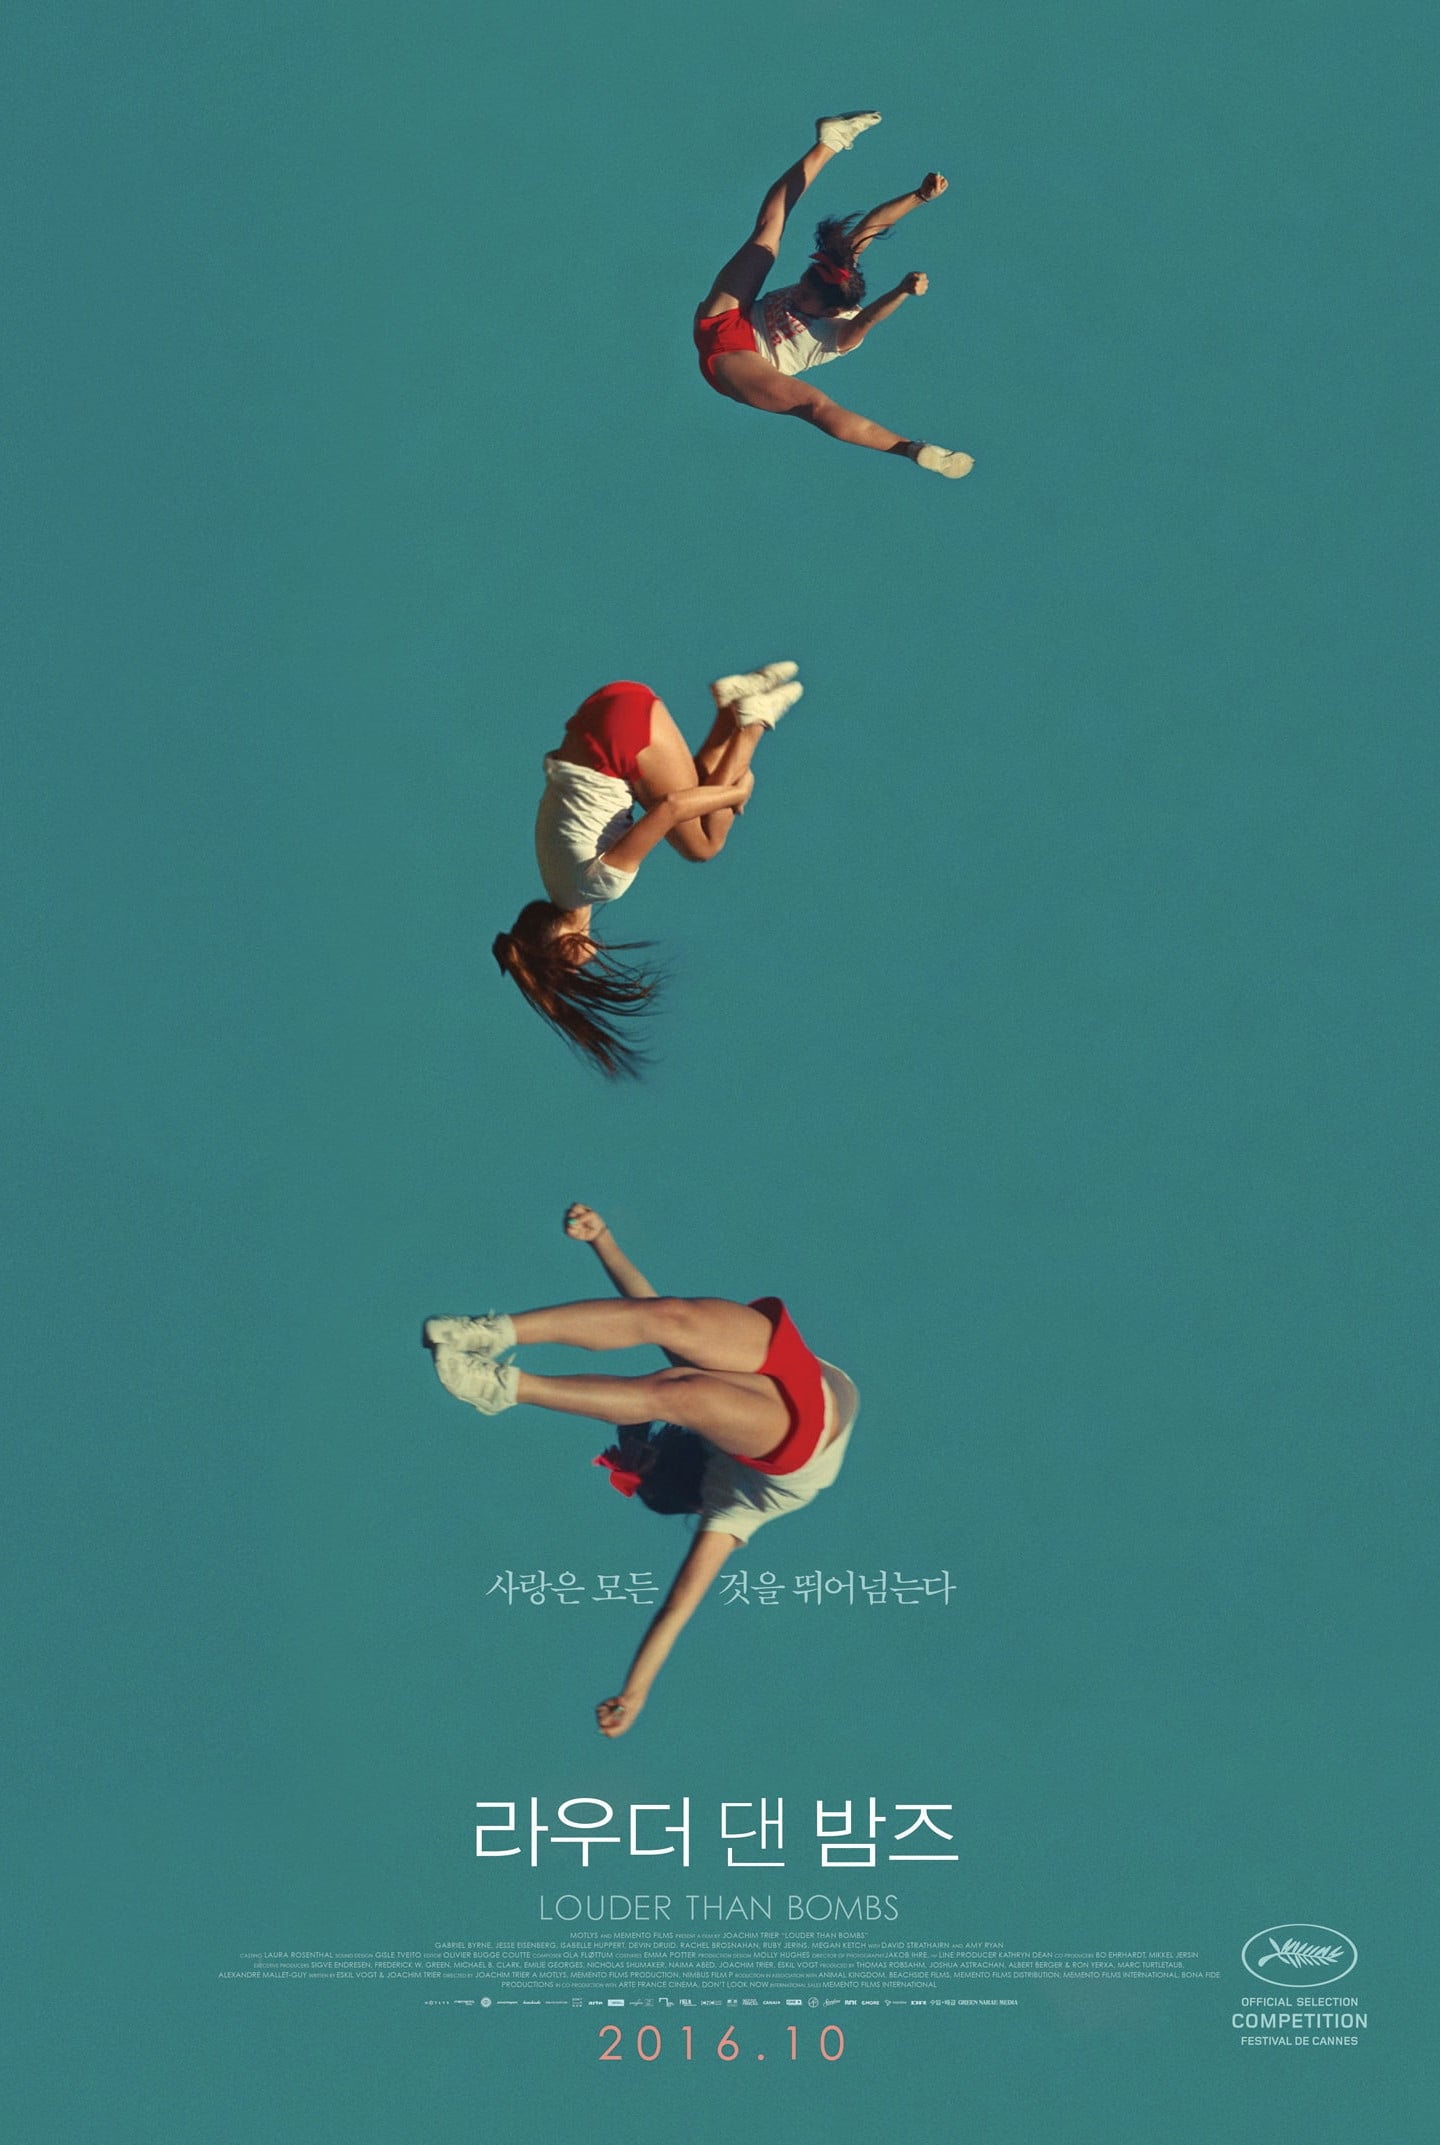 Poster and image movie Louder Than Bombs